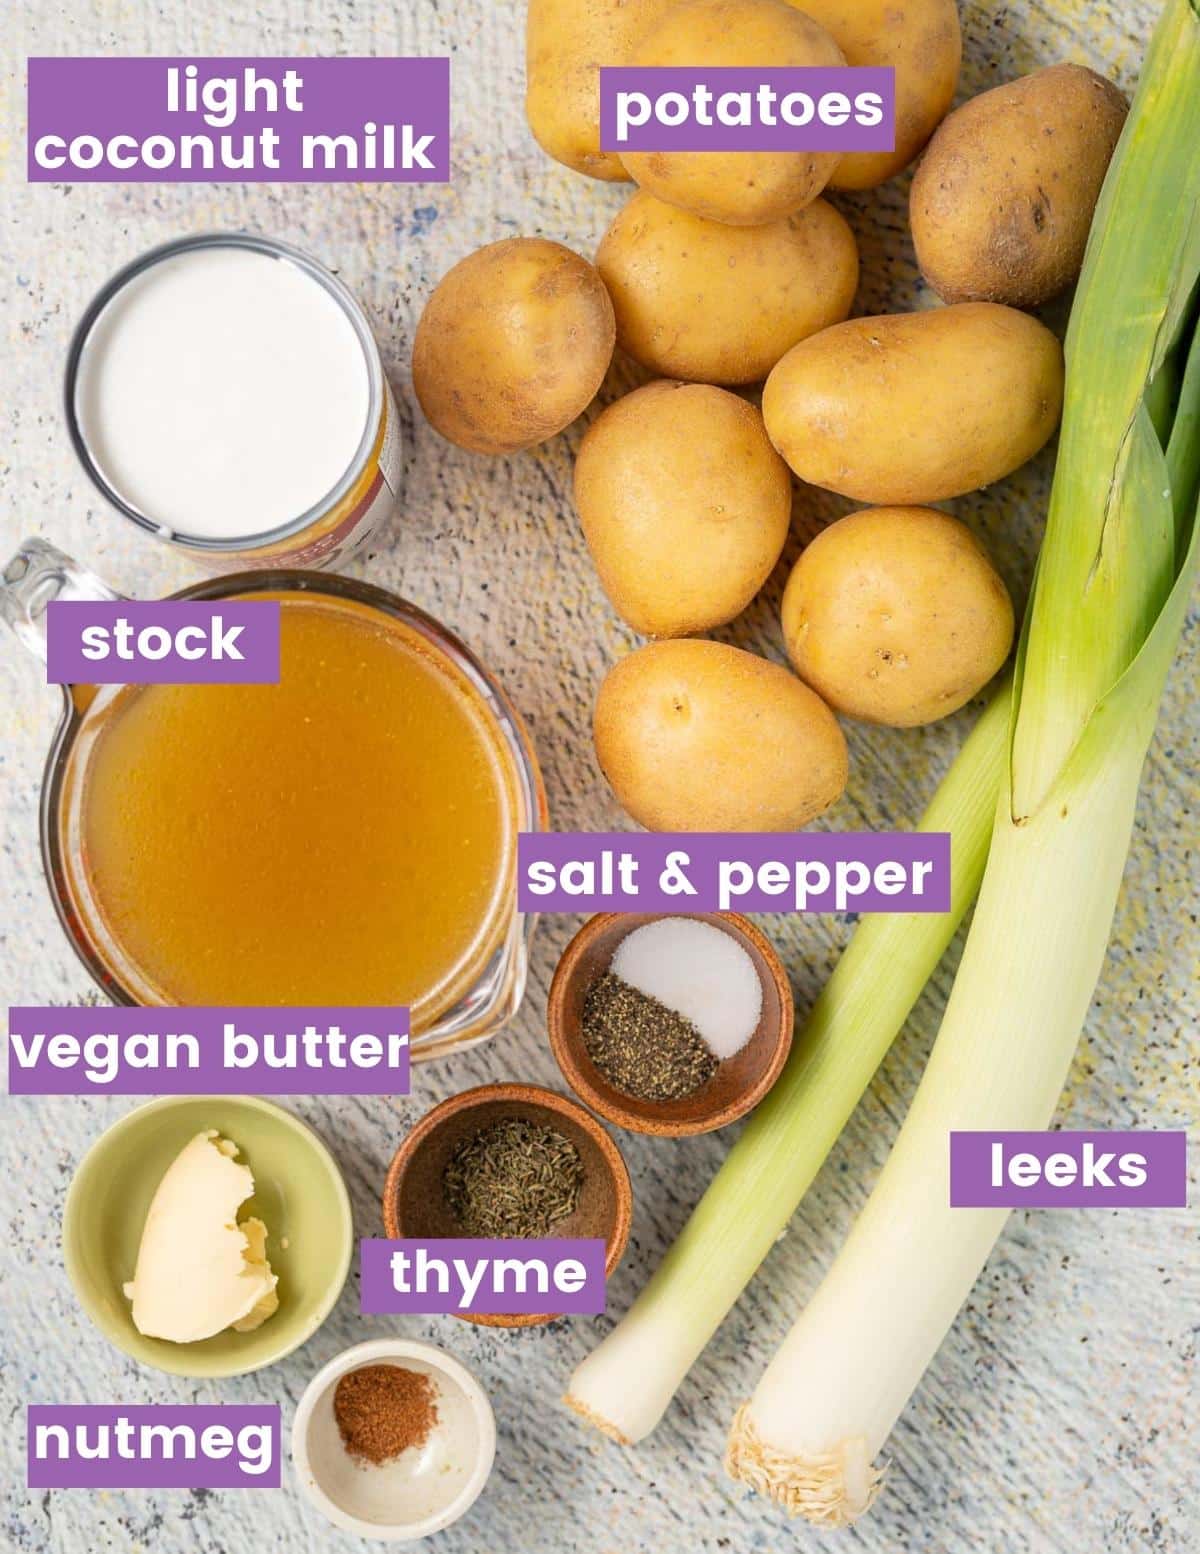 ingredients for vegan leek and potato soup as per the written ingredients list